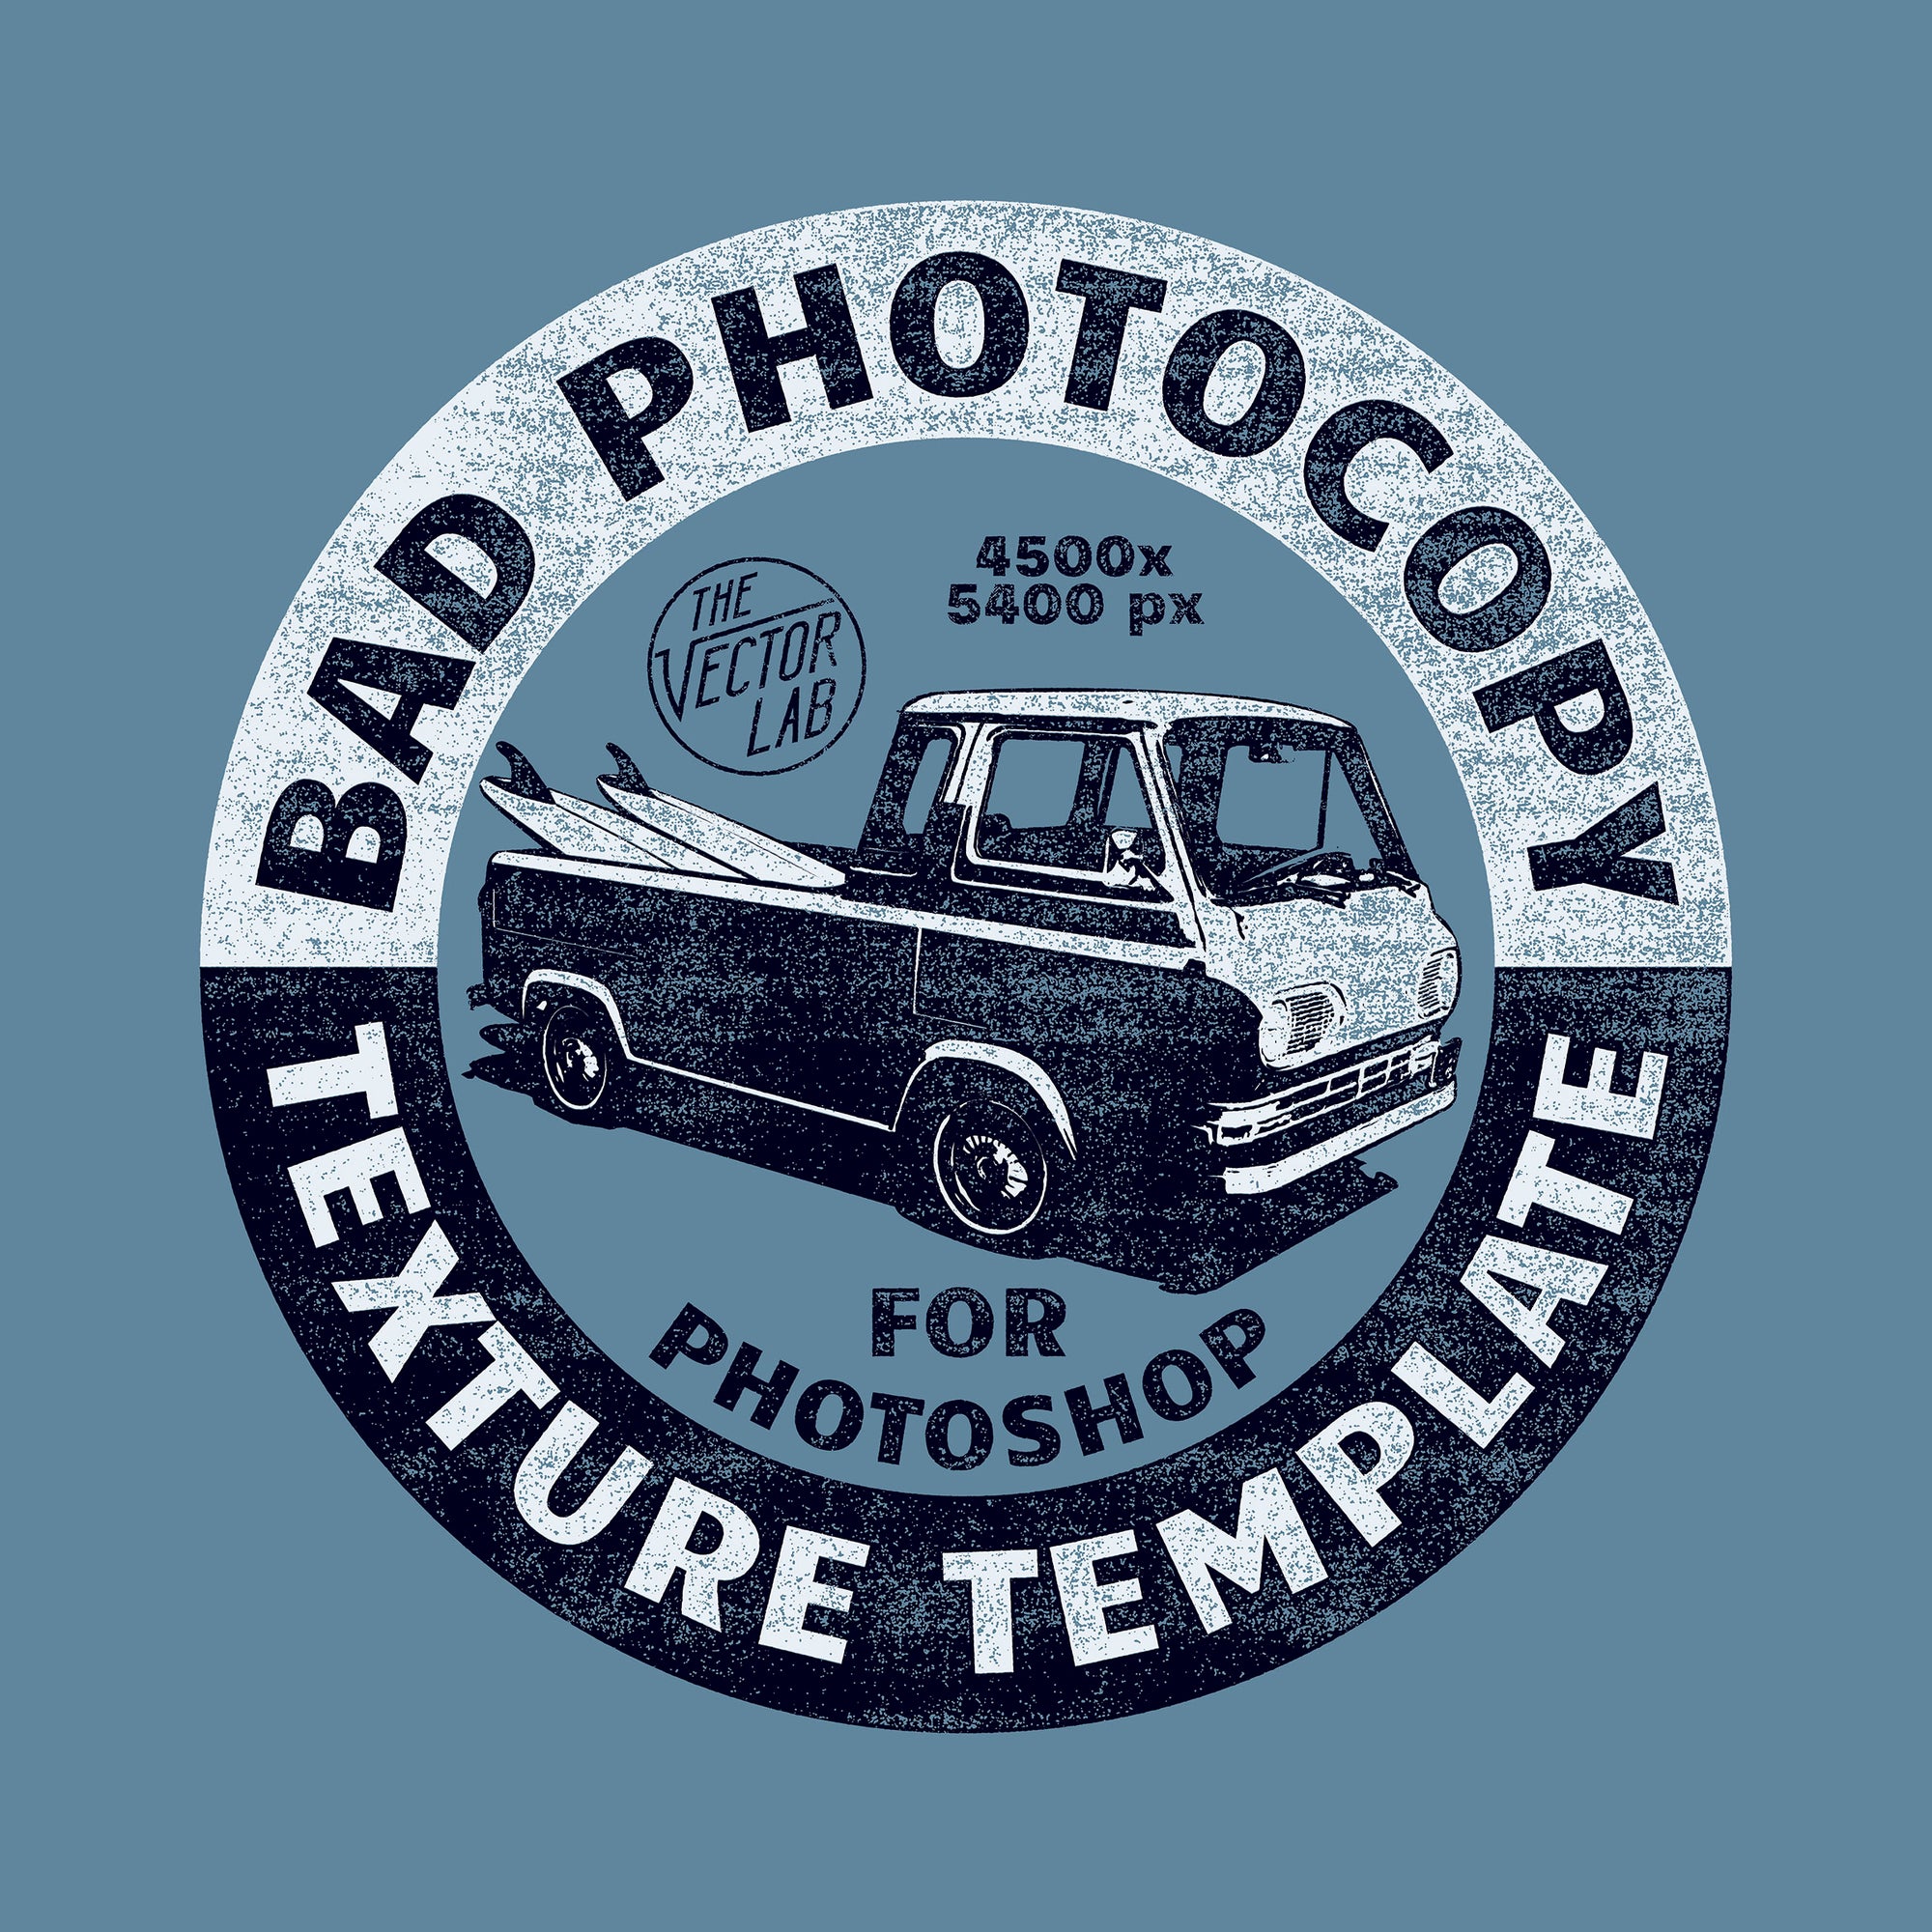 Bad Photocopy Texture Template for Photoshop